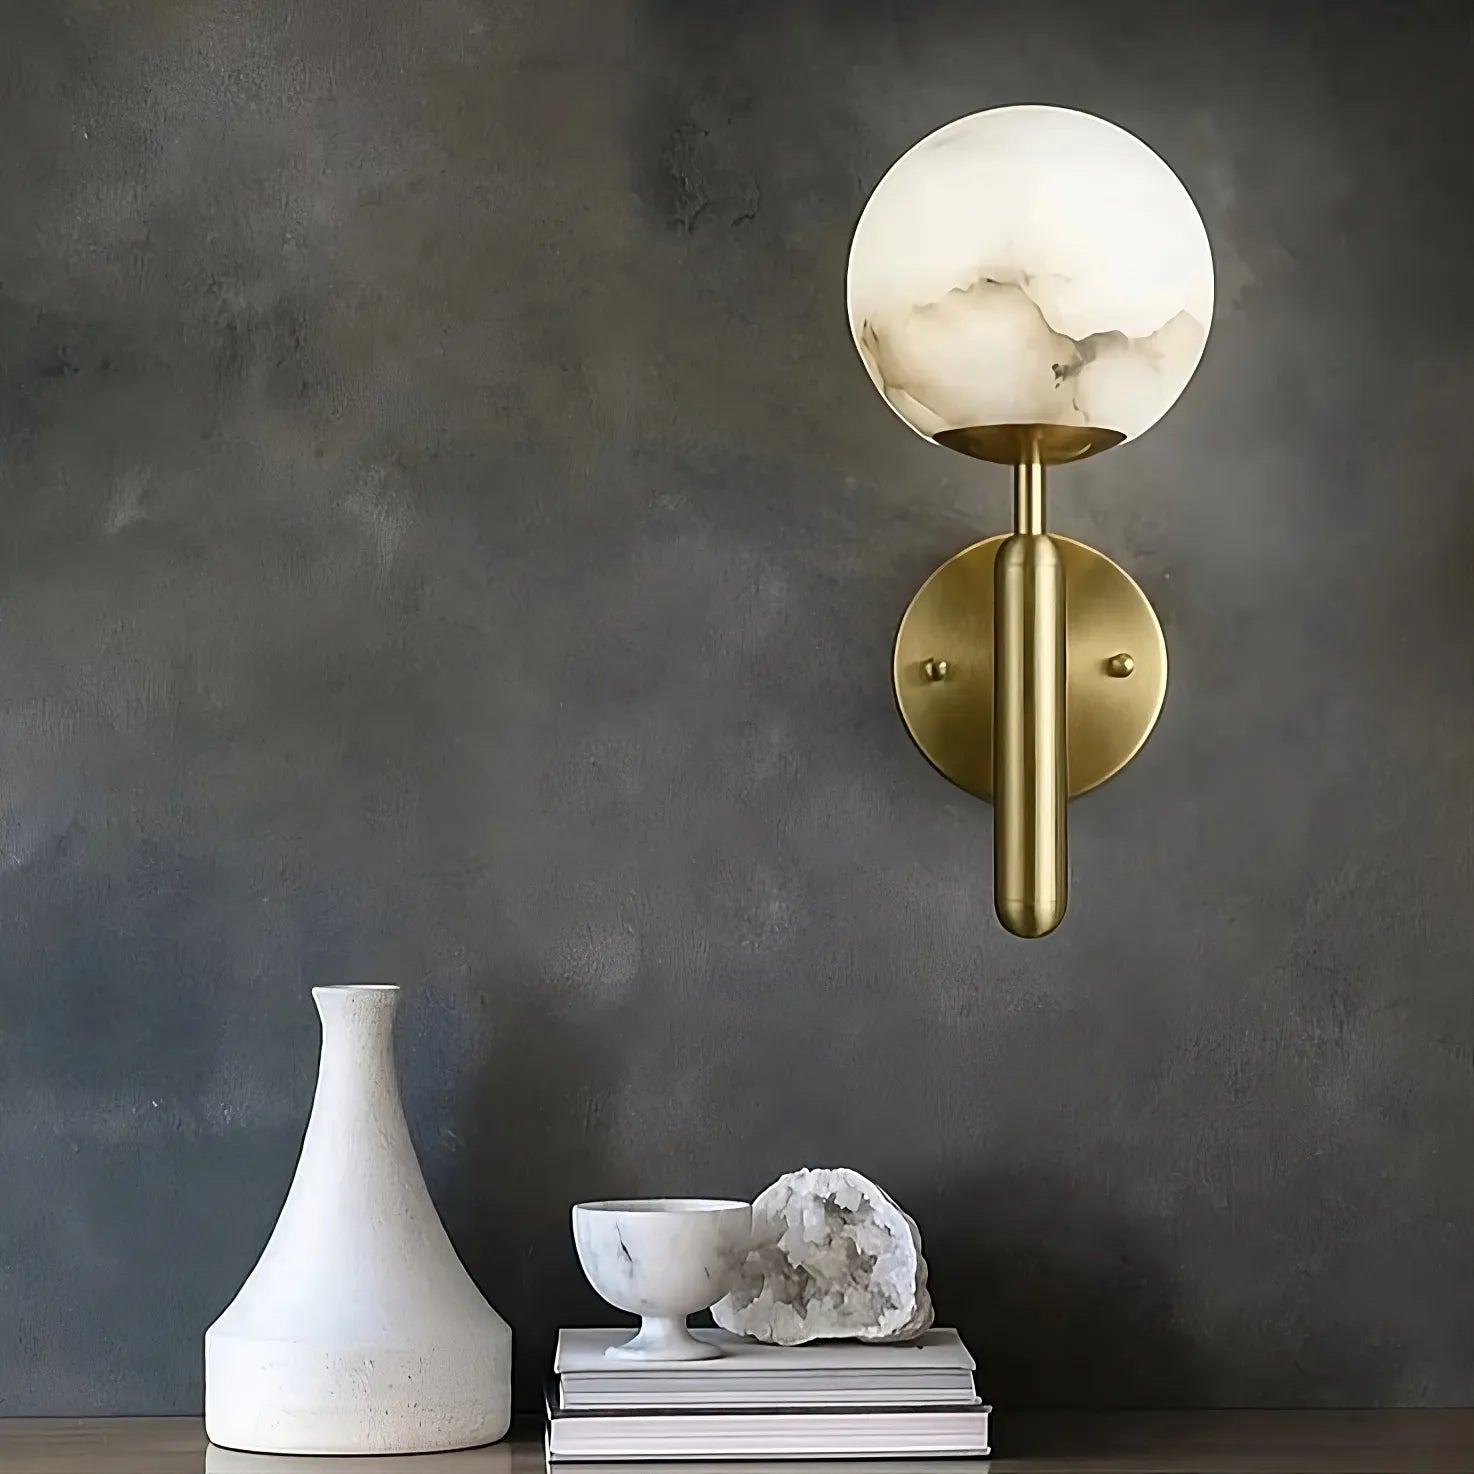 A modern wall sconce with a brass base and frosted glass globe is mounted on a dark, textured wall. Below it, a minimalist white vase, a white bowl, a crystal, and a small stack of books are neatly arranged on a table or shelf. The Natural Marble Sphere Wall Sconce by Morsale.com adds an elegant touch to the setup.